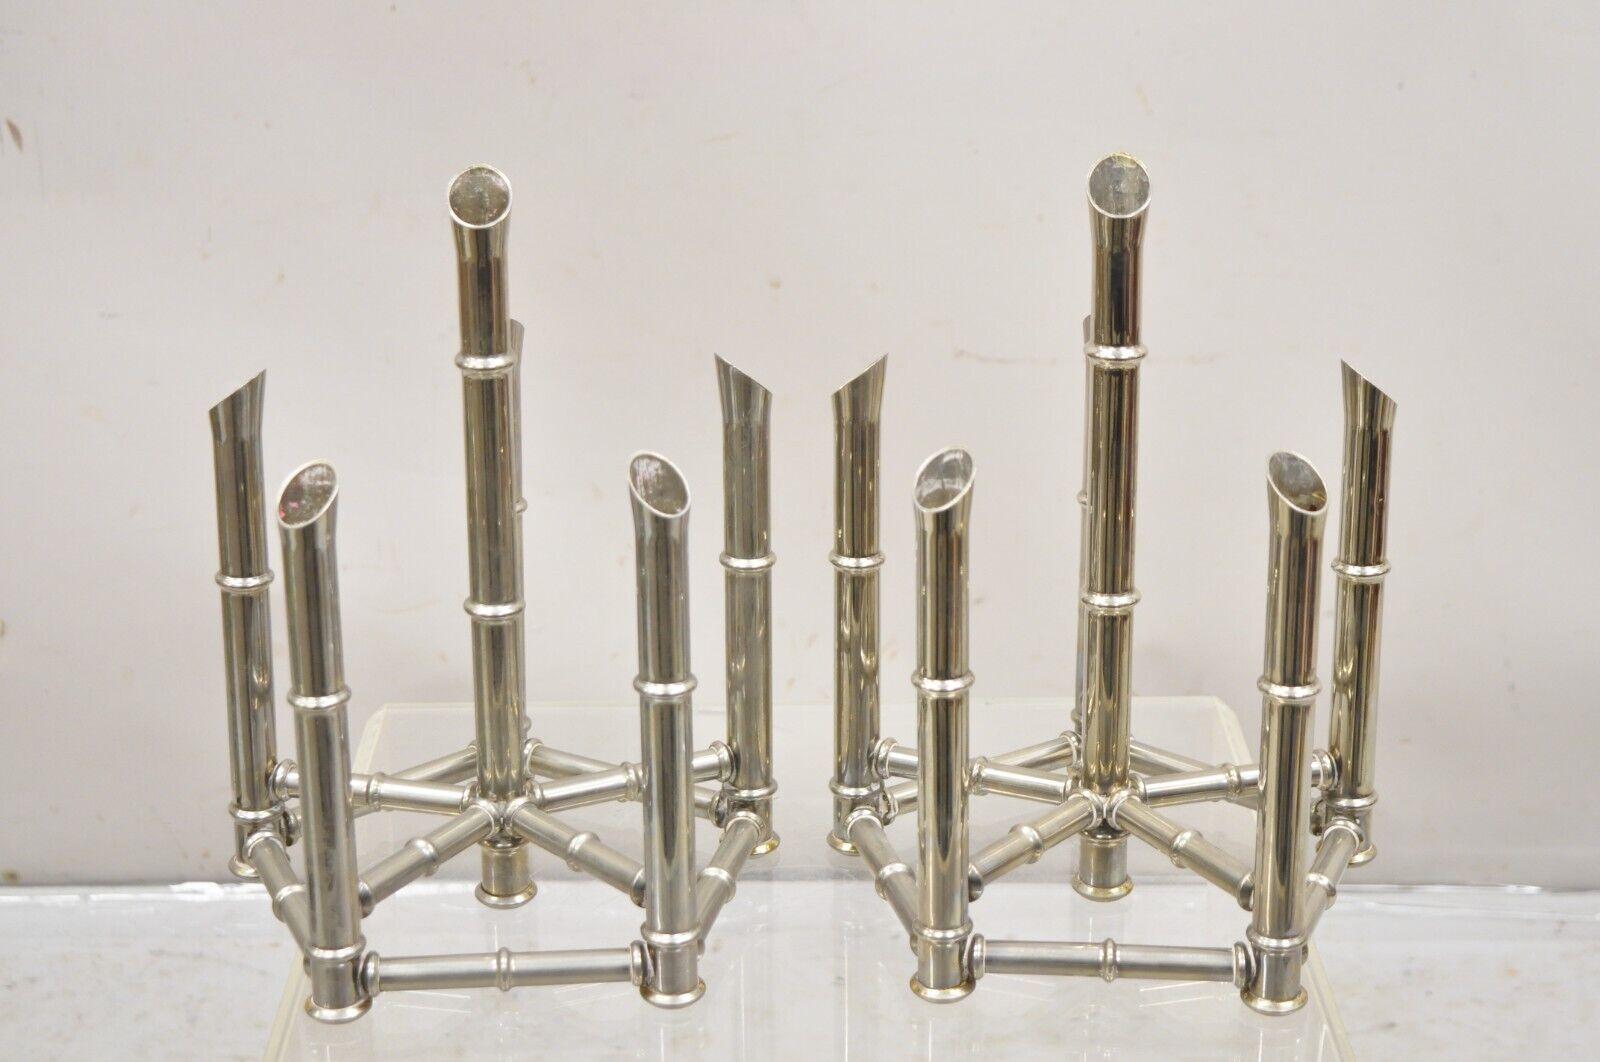 Vintage Hollywood Regency Silver Plated Chrome Faux Bamboo Candlestick Stands - a Pair. Item features 6 candle holders, faux bamboo design, very nice pair. Circa Mid 20th Century. Measurements:  19